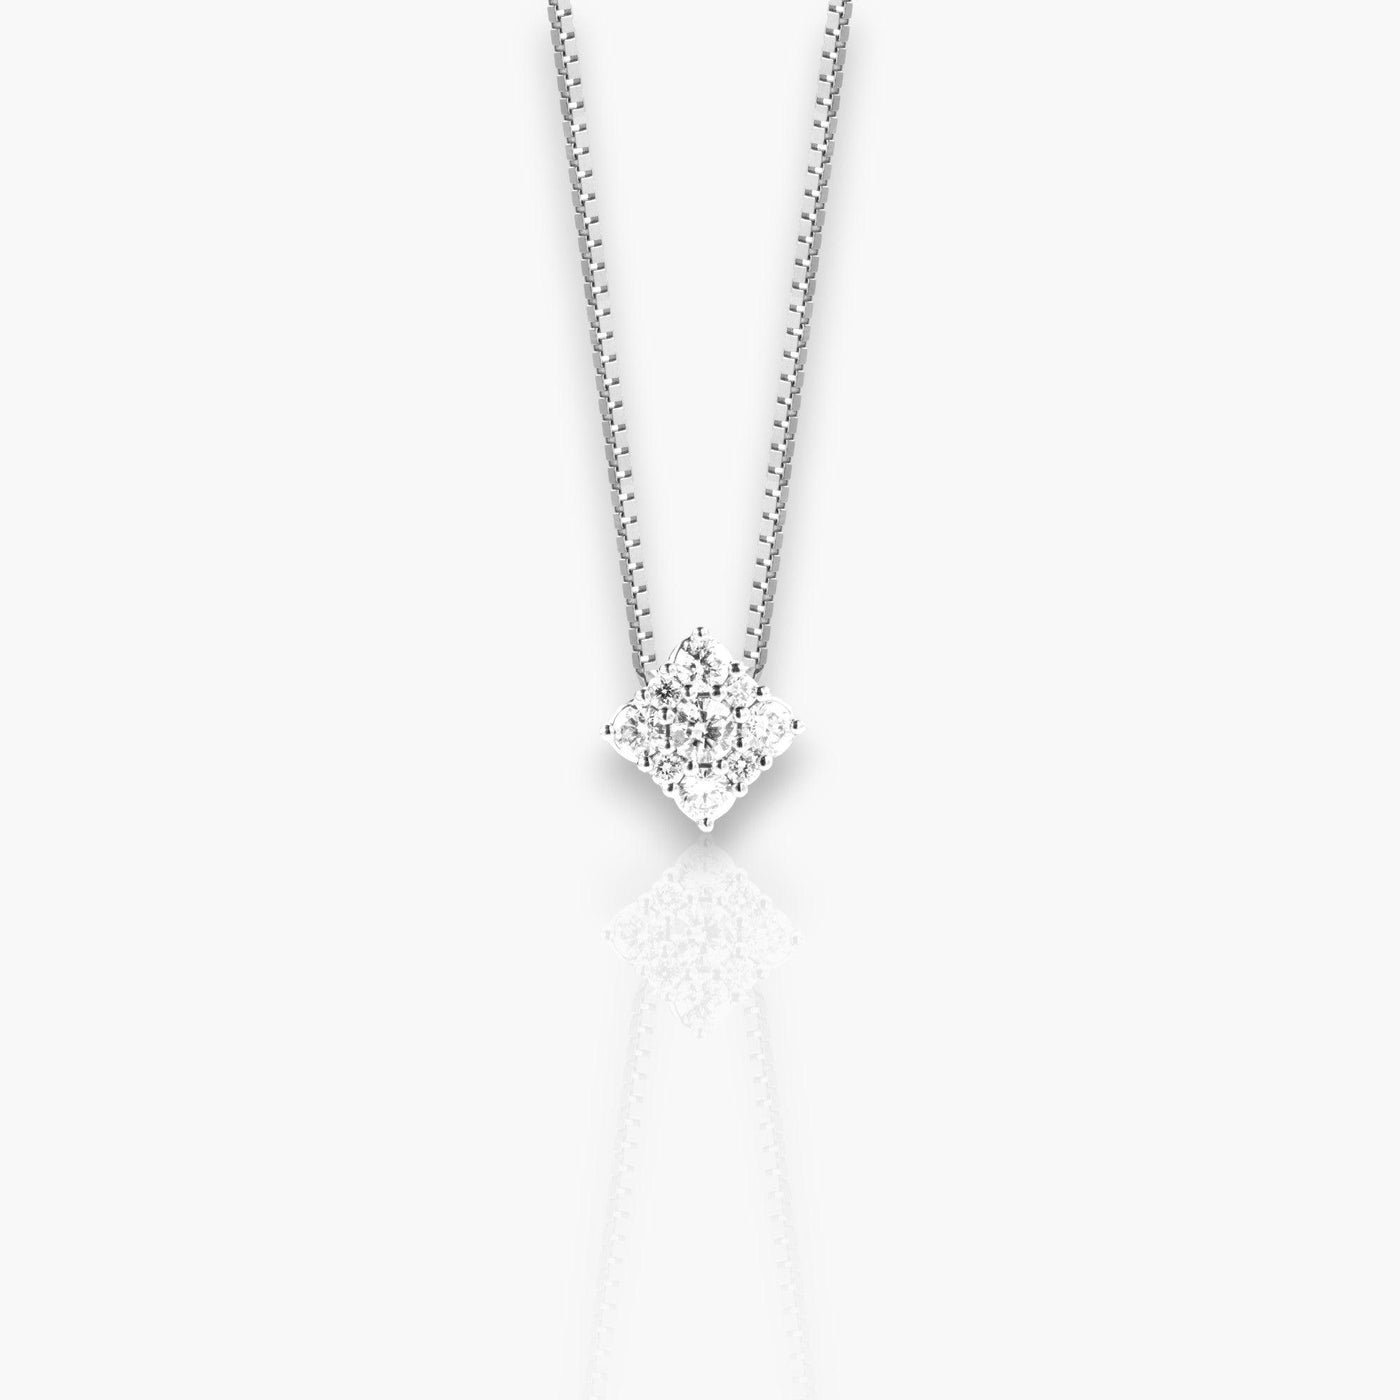 Necklace in White Gold and 9 Diamonds (Rhombus) - Moregola Fine Jewelry